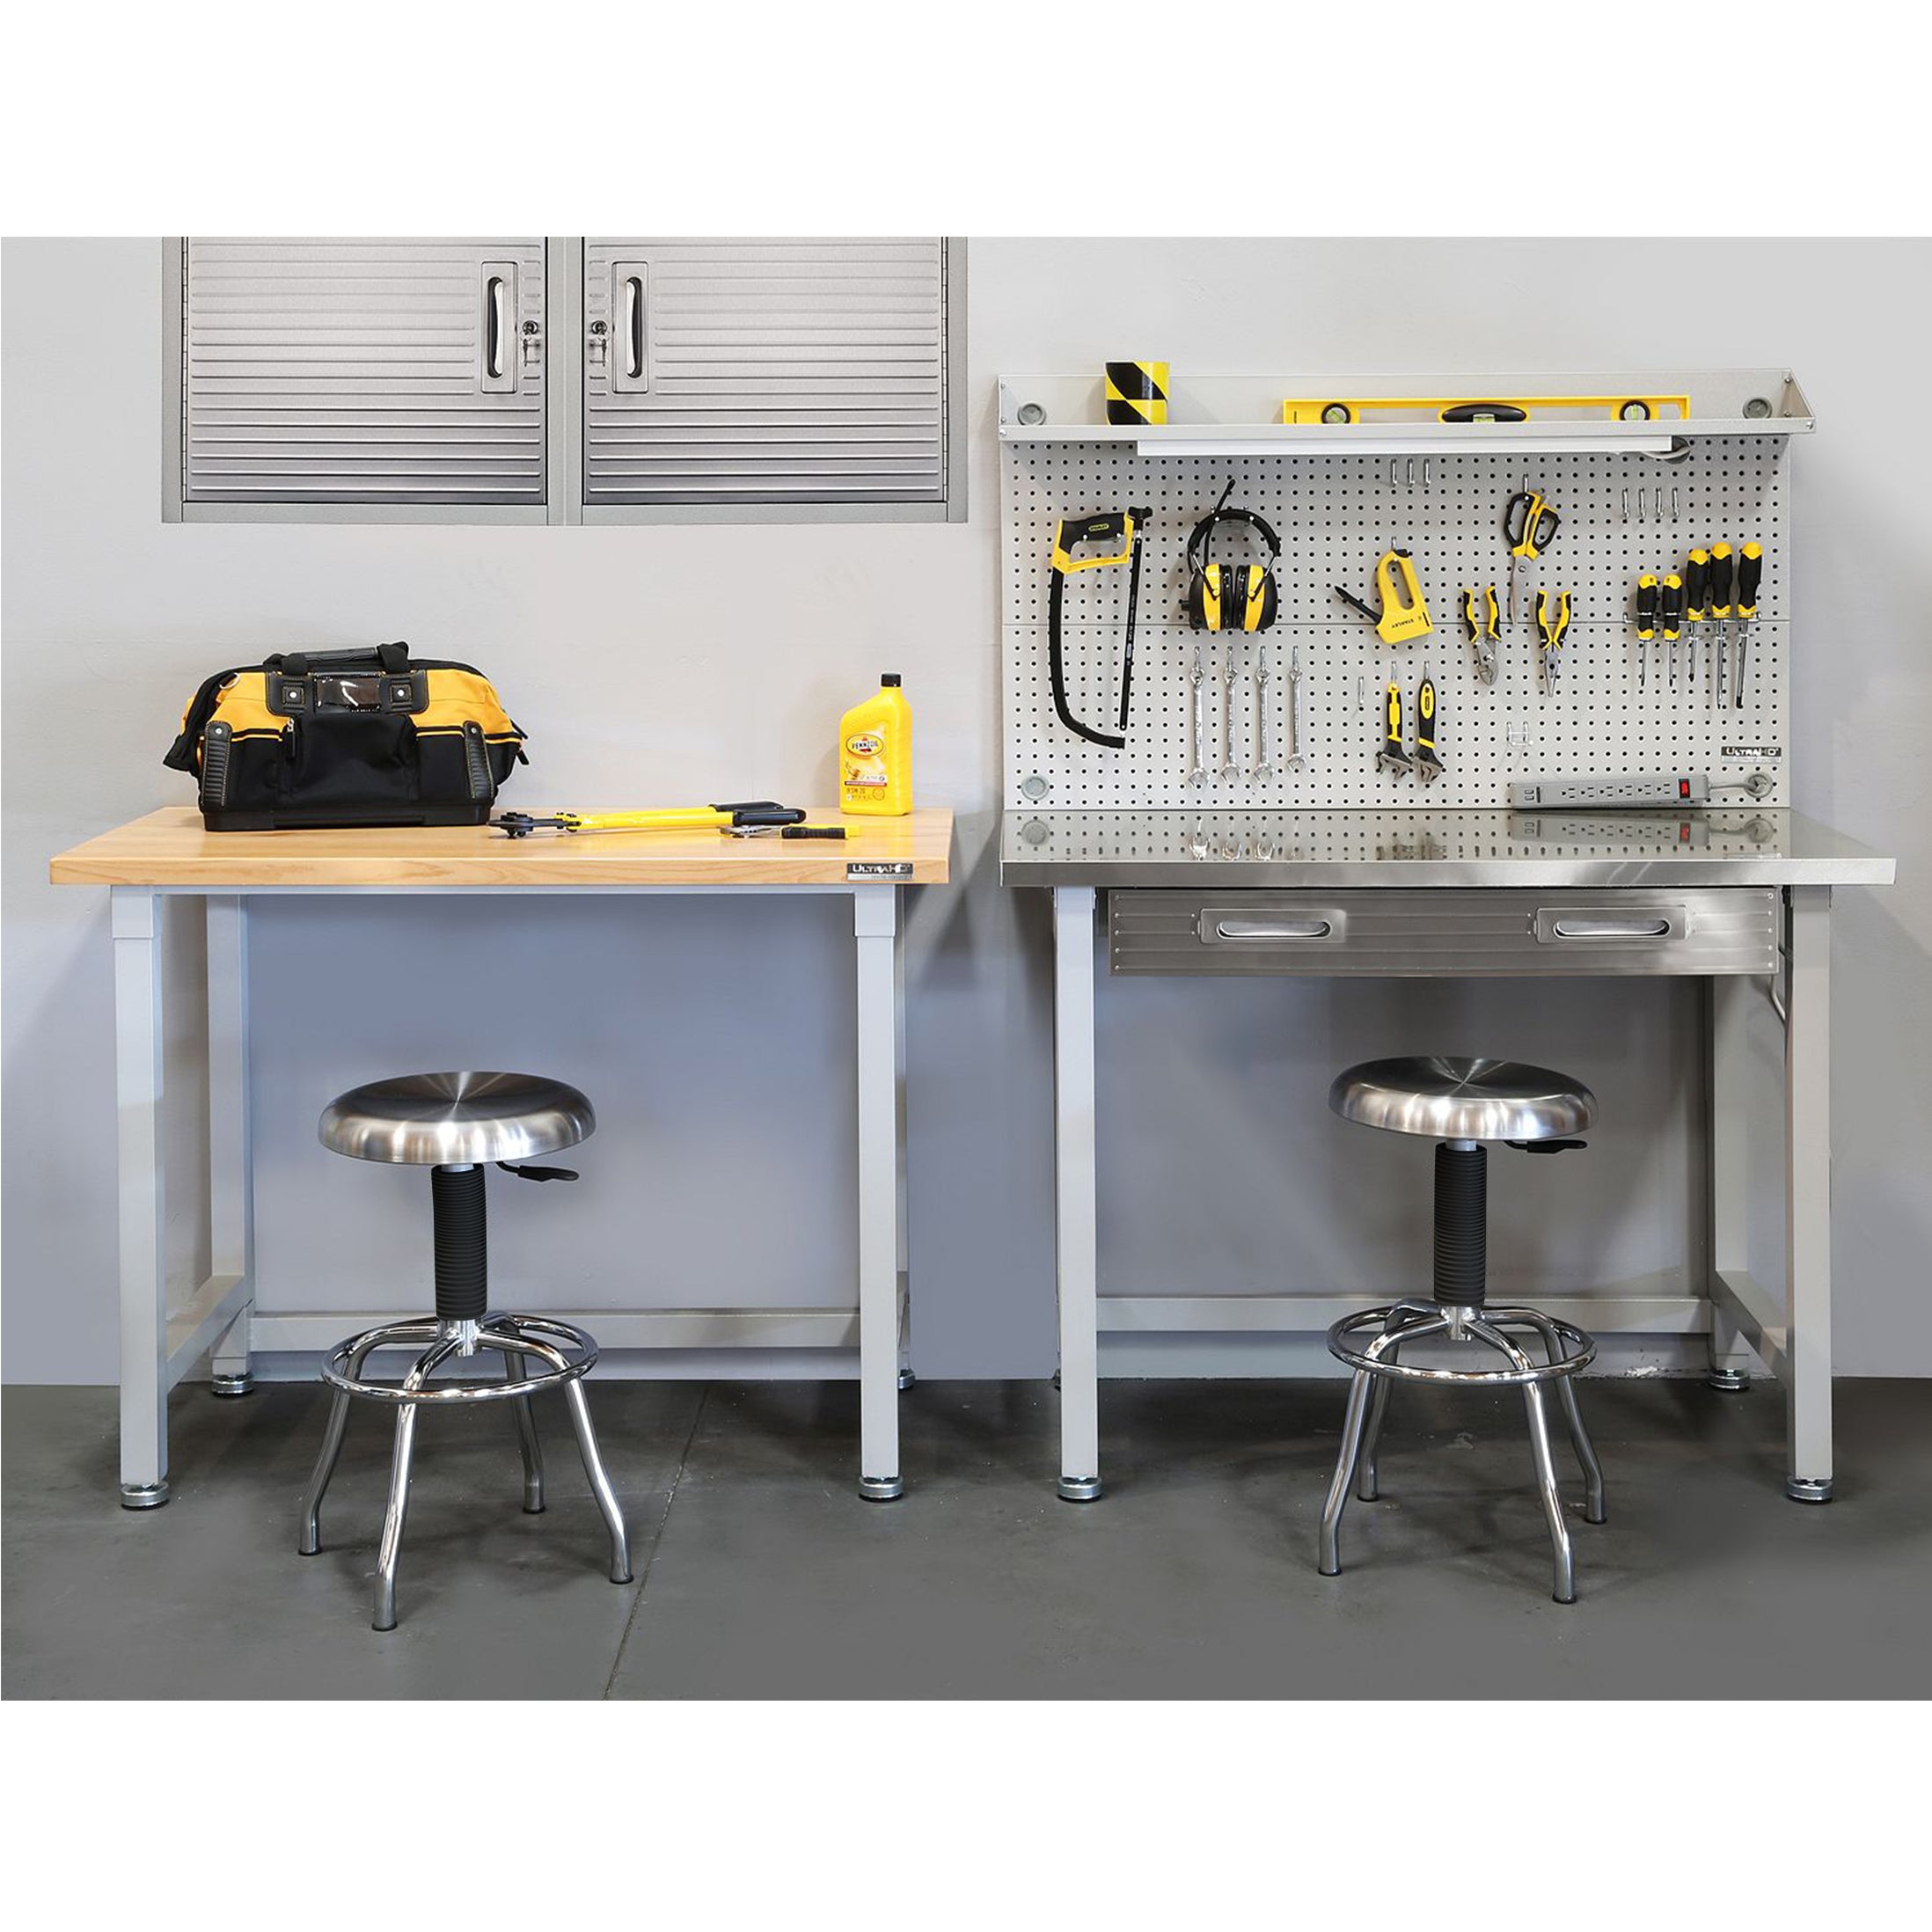 Seville Classics UltraHD Commercial Heavy-Duty Workcenter, with Pegboard